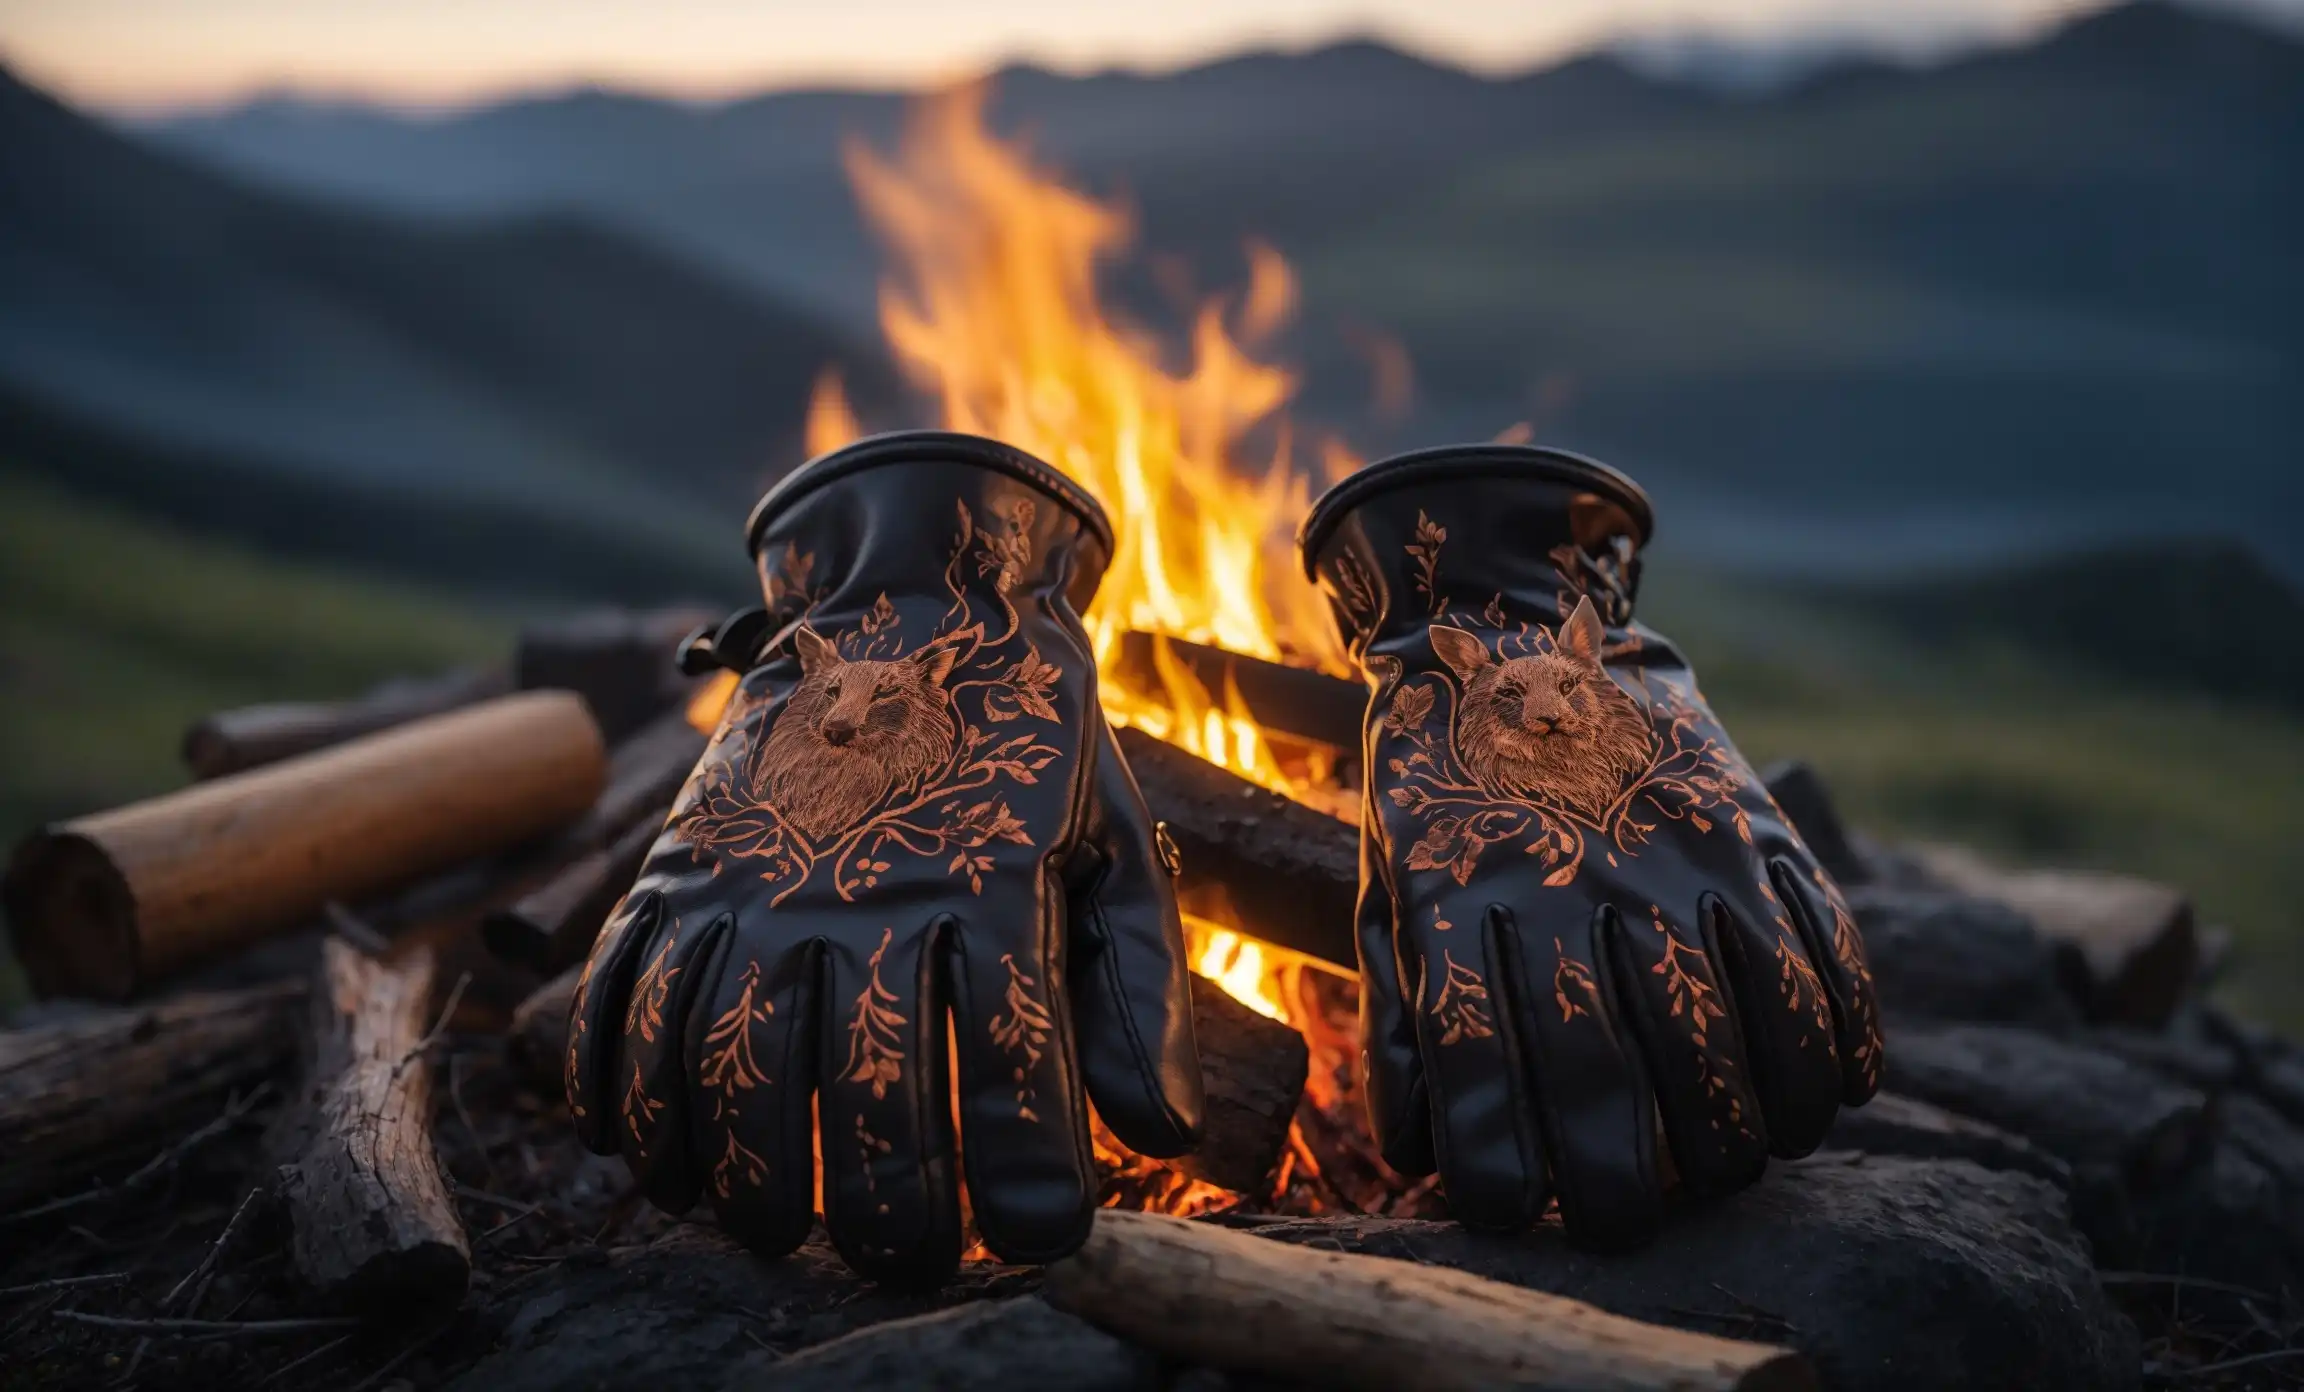 Fire-Resistant Gloves for campfire cooking